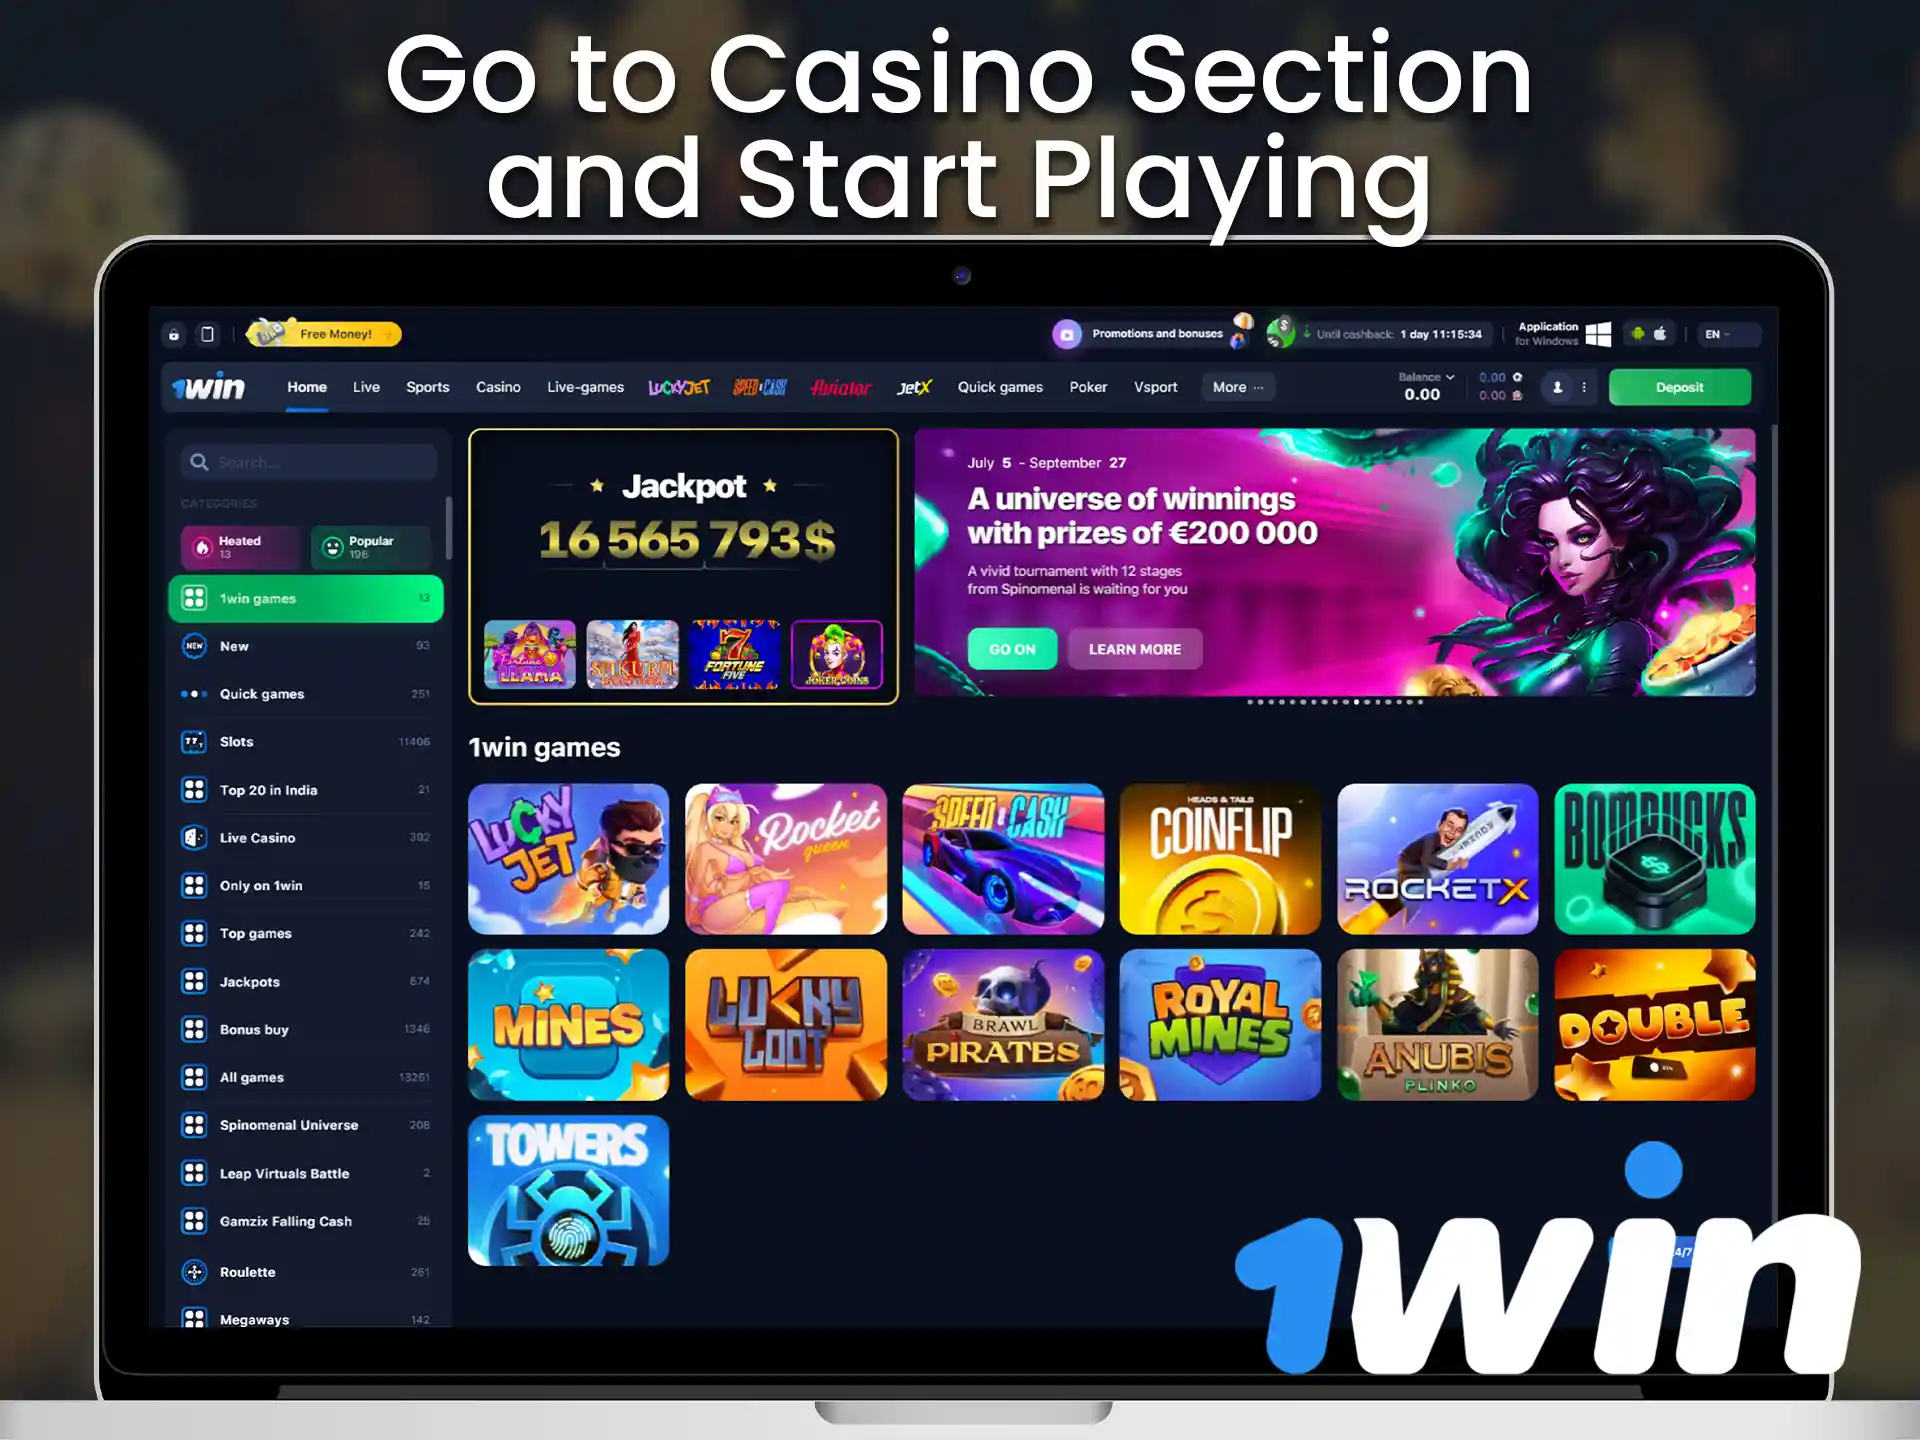 Click on the casino section and start playing after making a deposit.